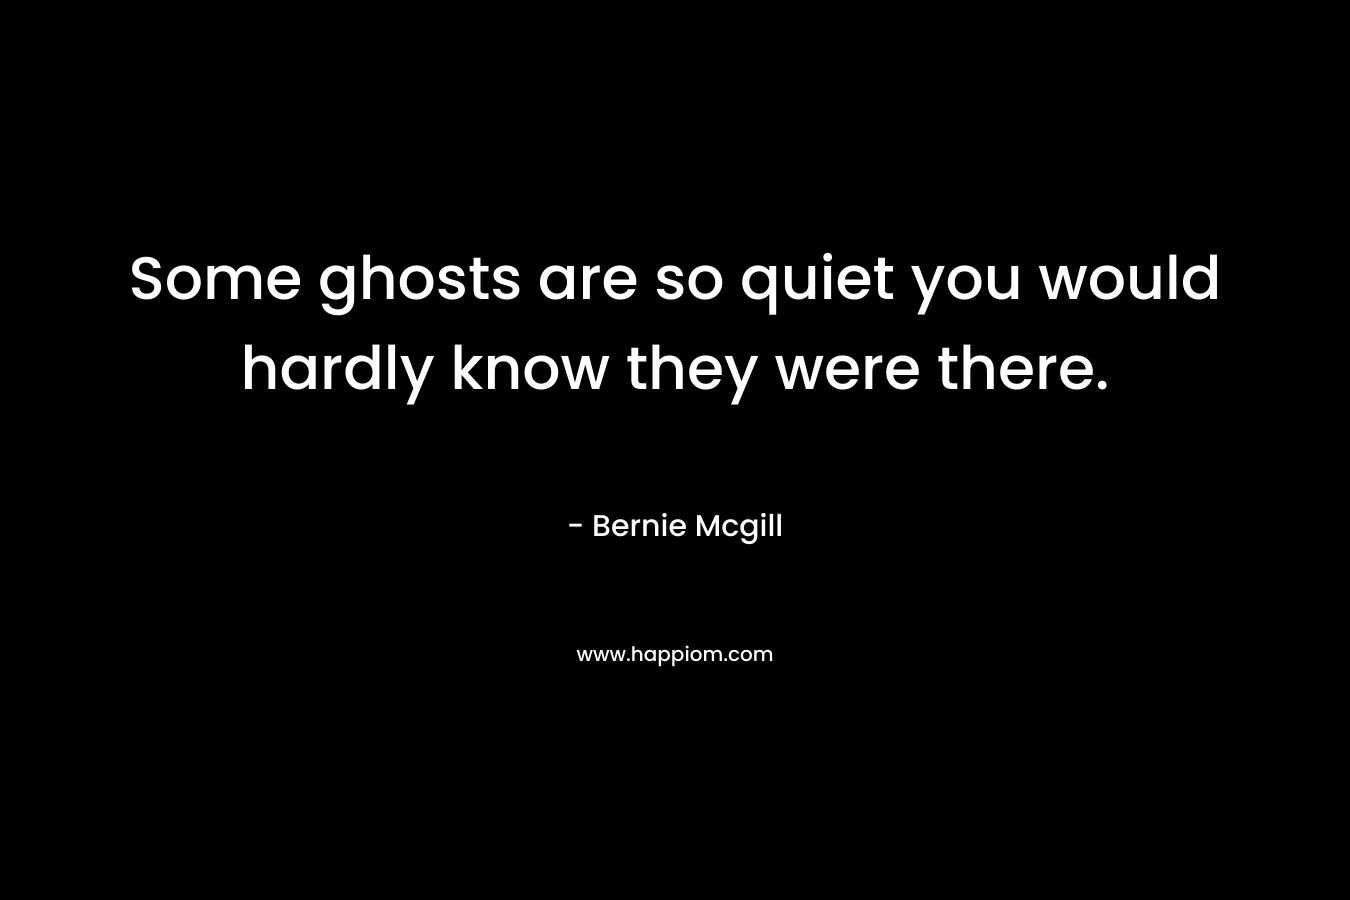 Some ghosts are so quiet you would hardly know they were there.